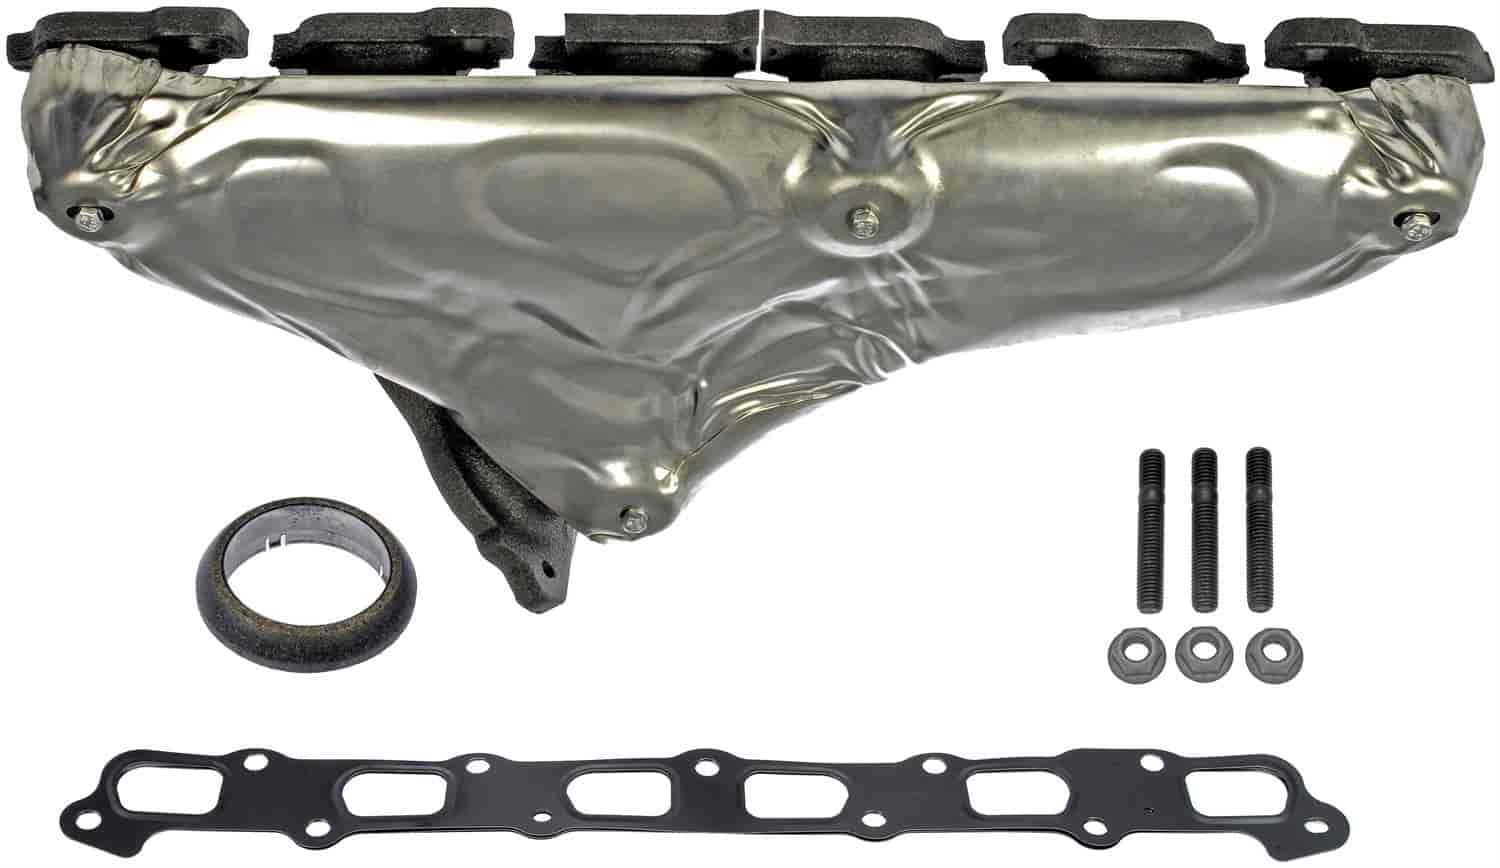 Exhaust Manifold Kit - Includes Required Gaskets and Hardware To Downpipe